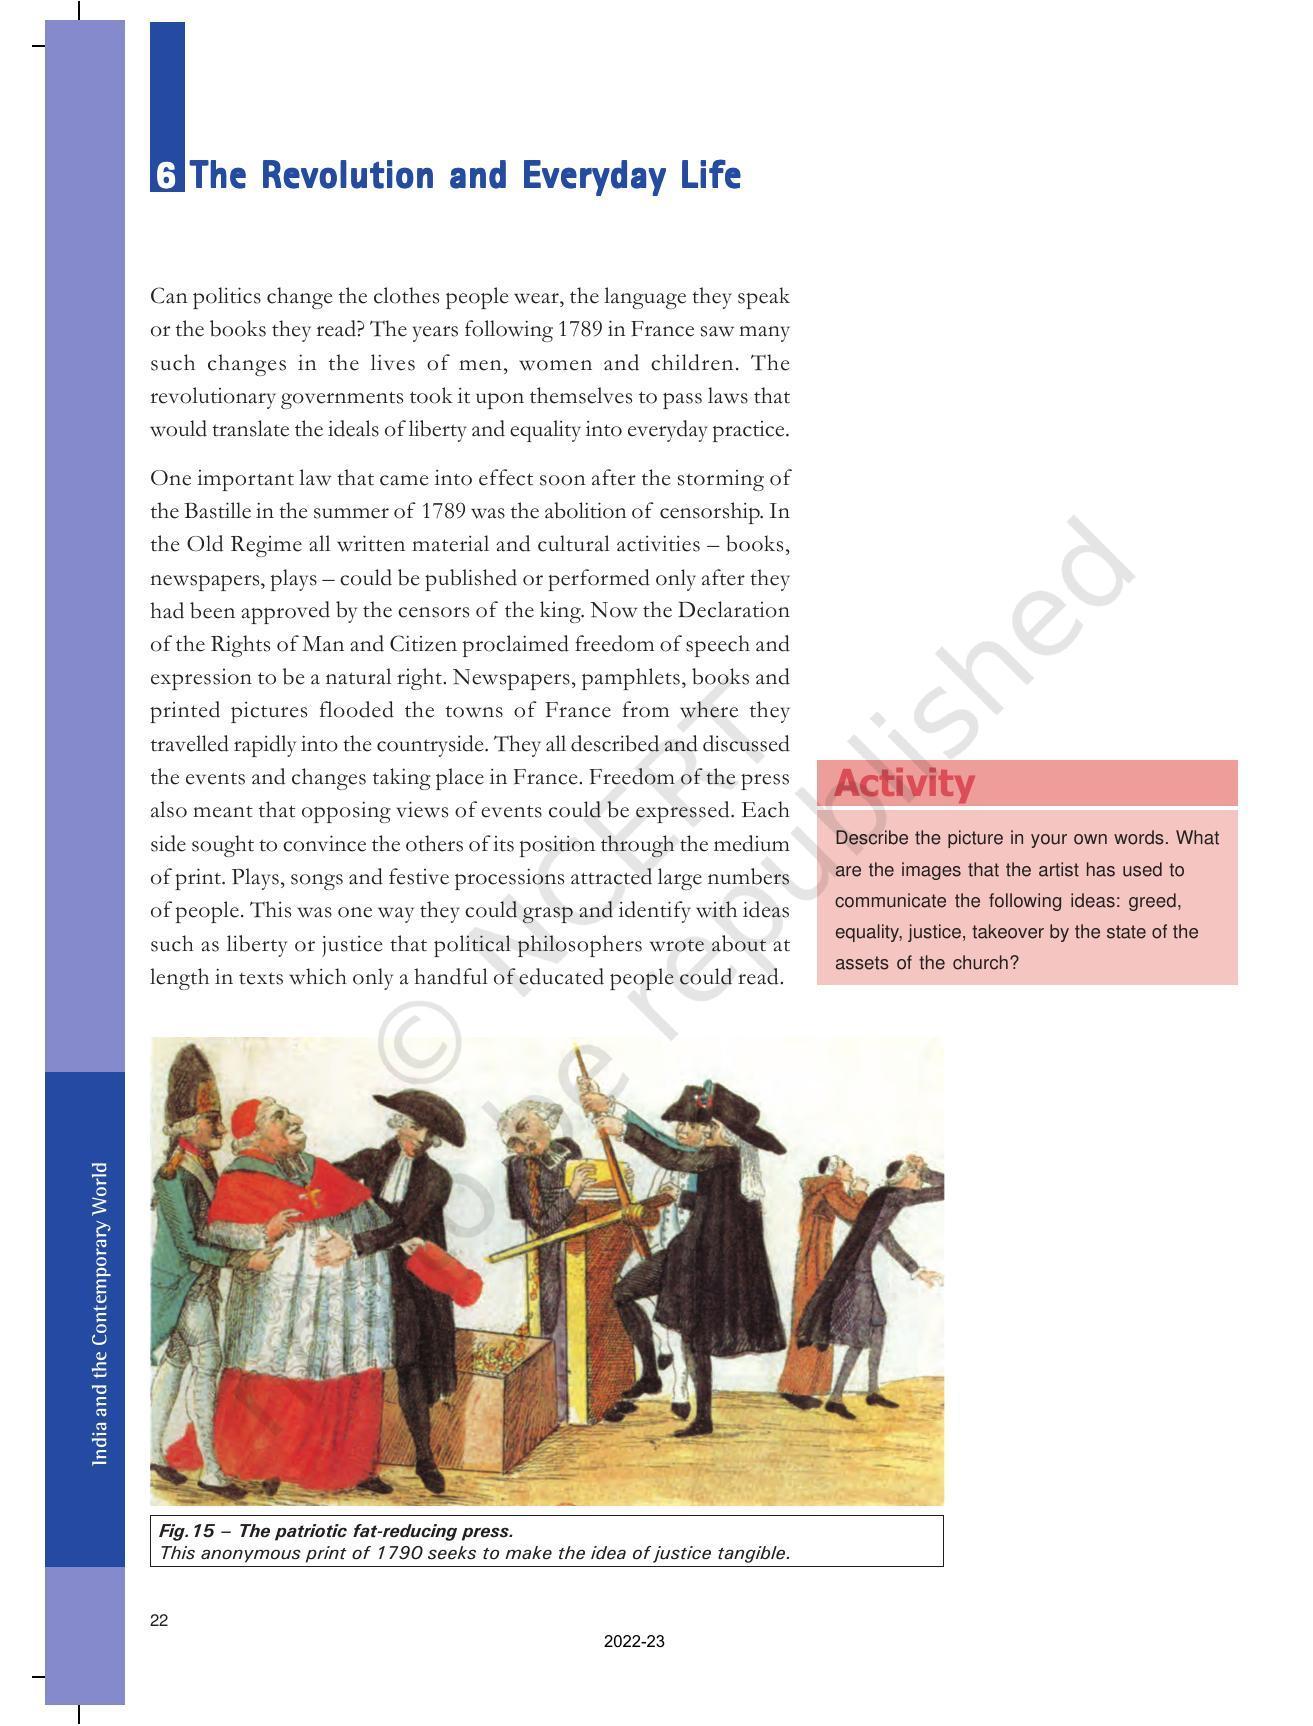 NCERT Book for Class 9 History Chapter 1 The French Revolution - Page 22